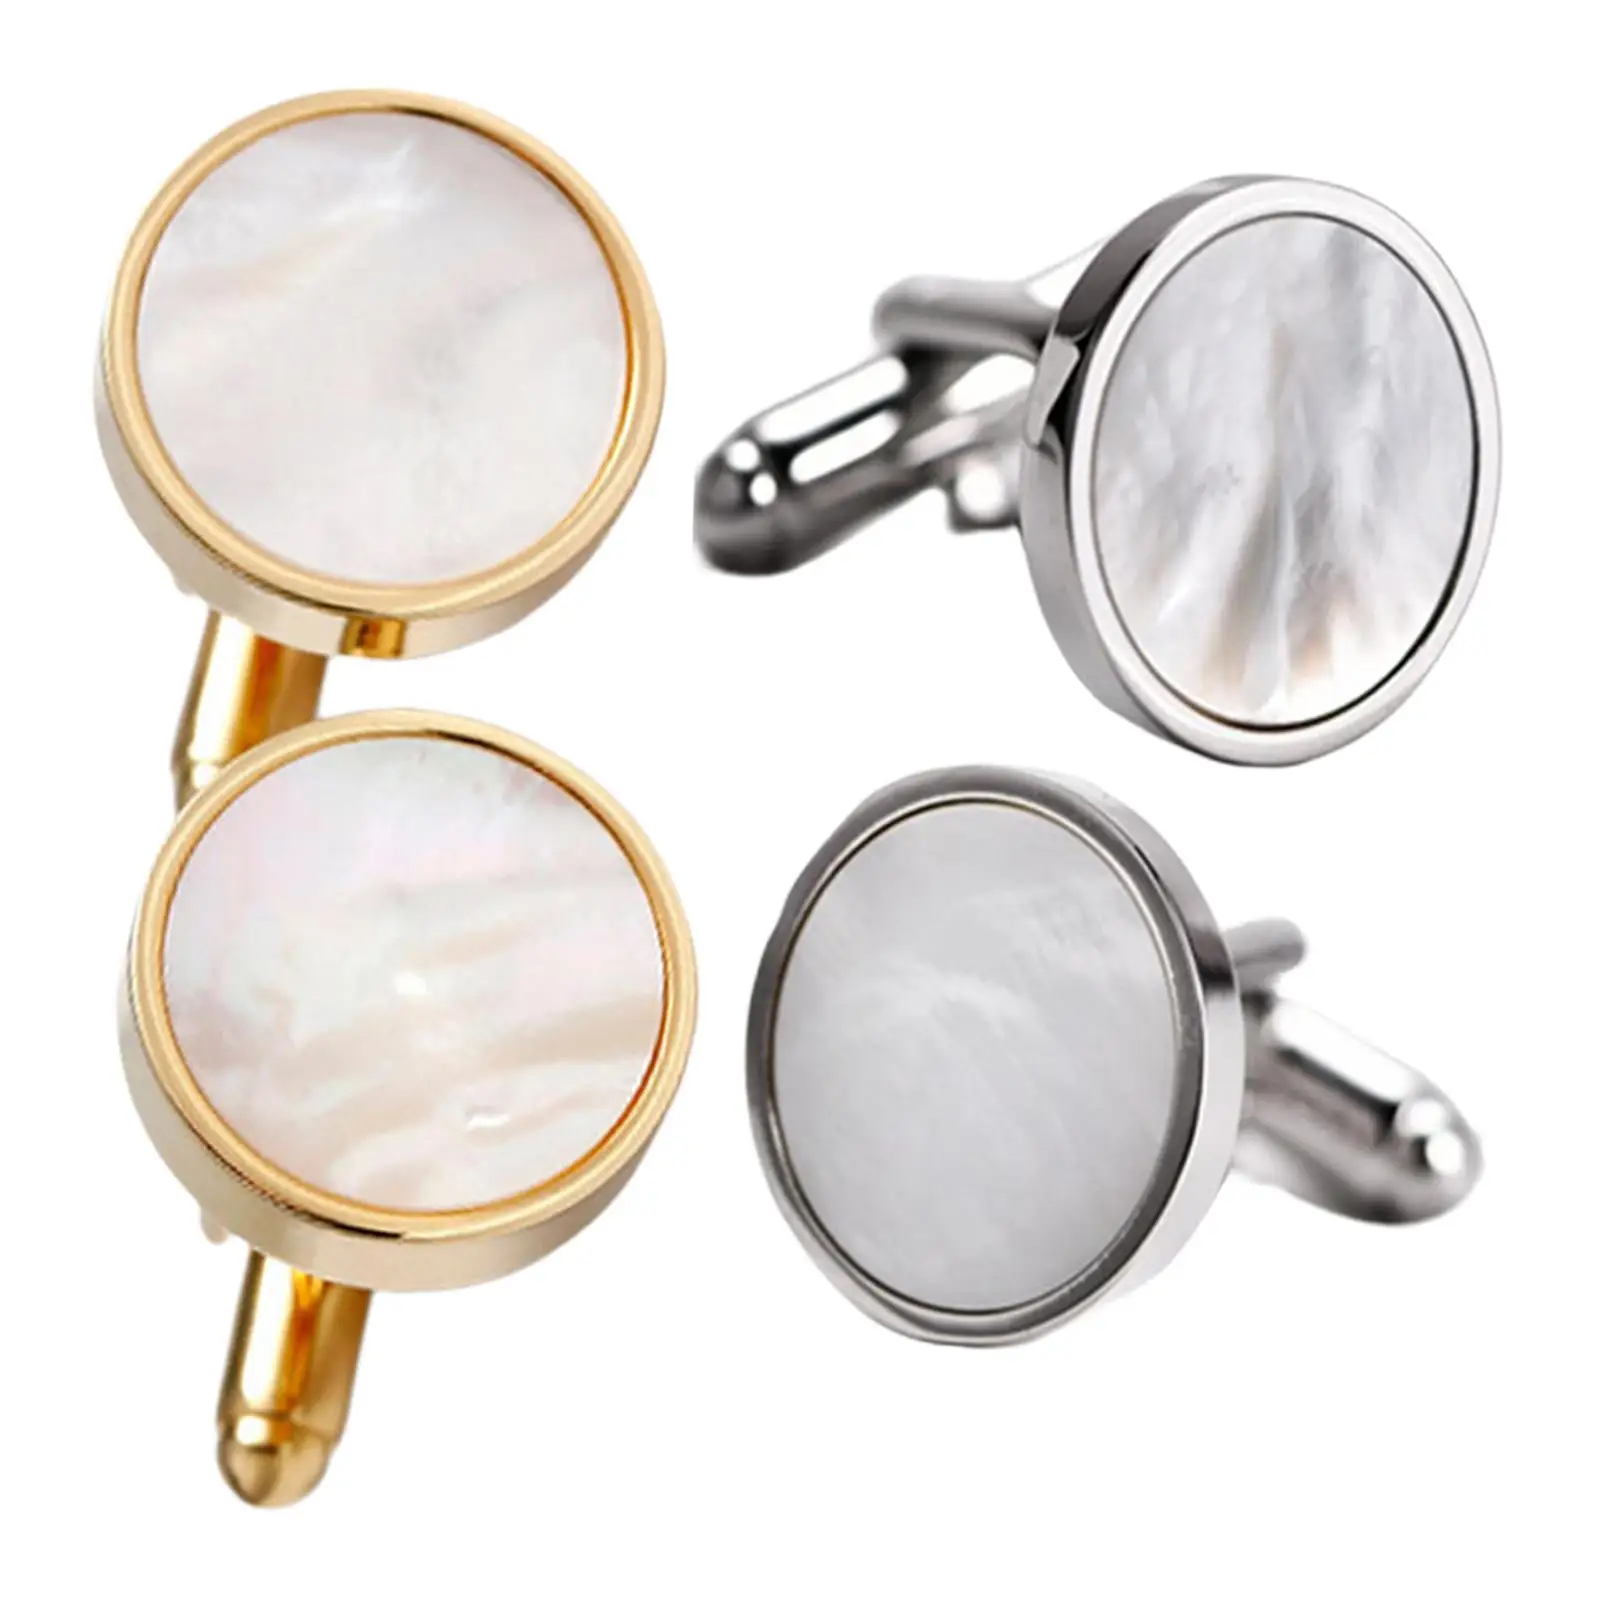 Mens Cufflinks Suit Elegant Buttons Jewelry for Christmas Business Party